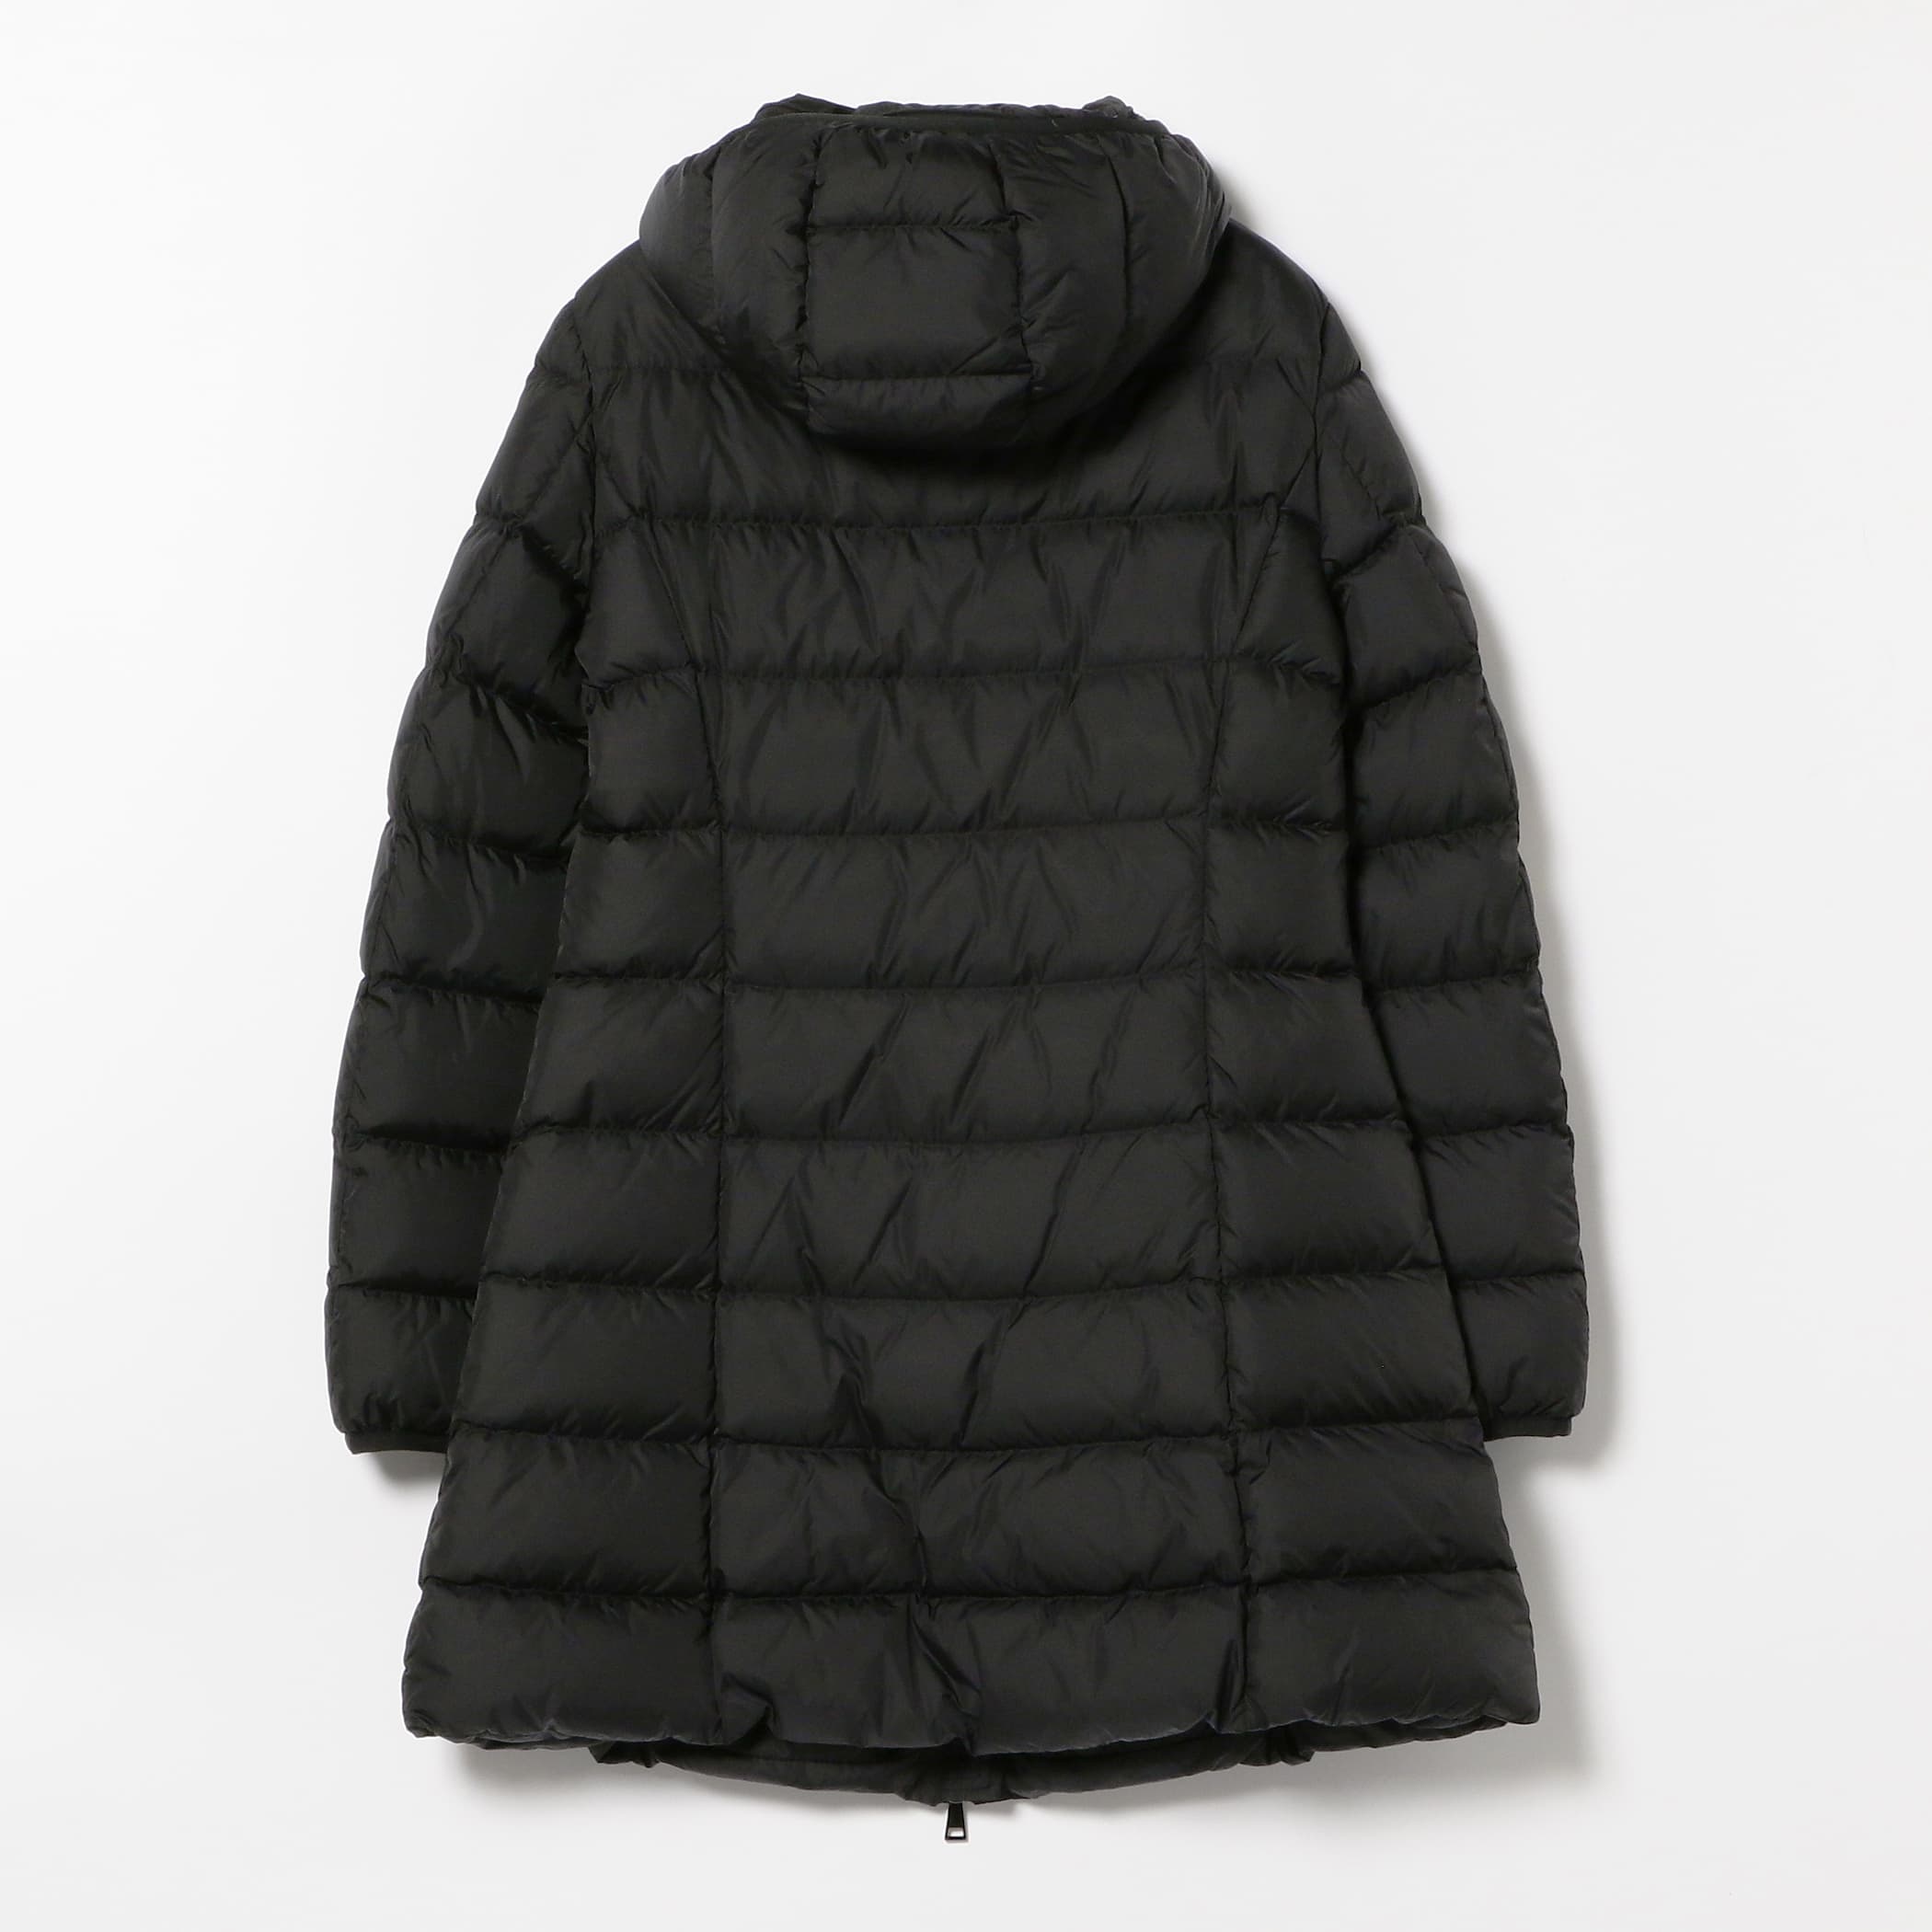 Demi-Luxe BEAMS Demi-Luxe BEAMS MONCLER GIE 羽絨外套 